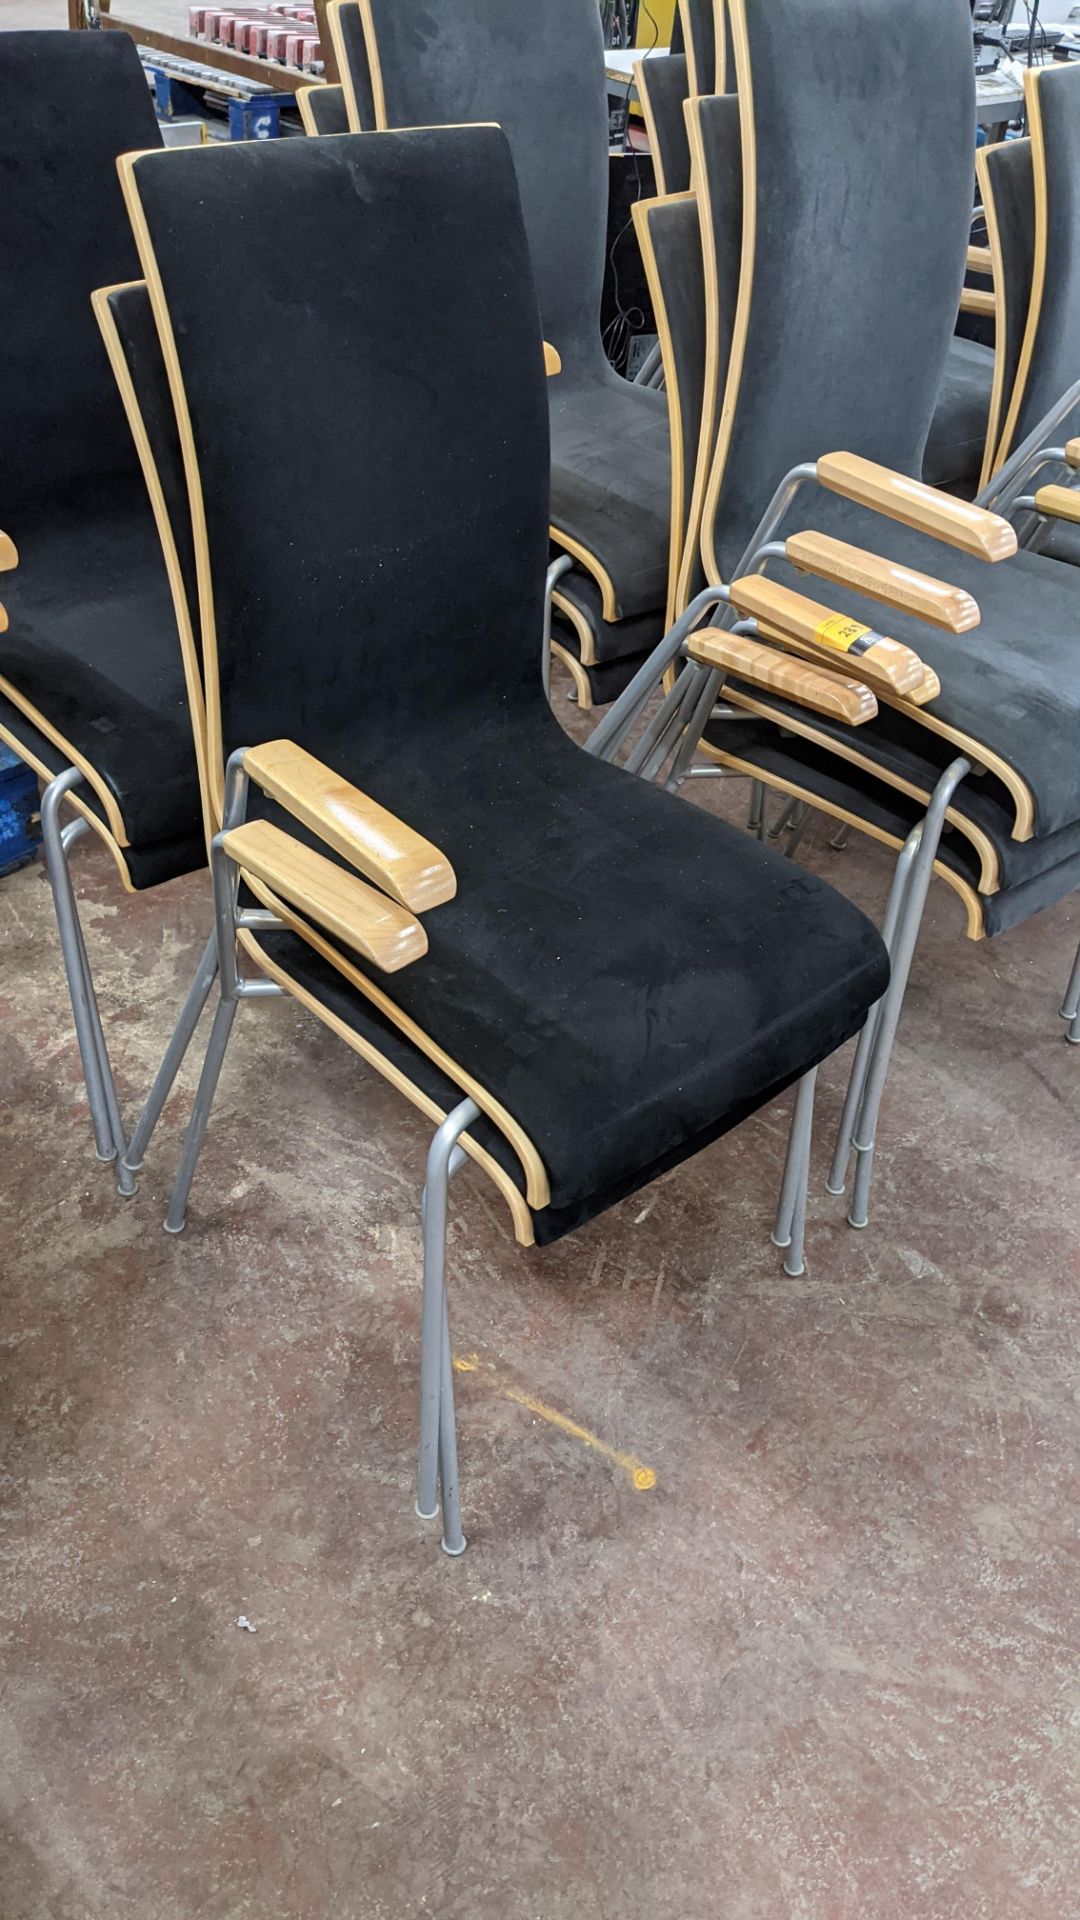 4 off matching stacking chairs in pale brown wood with black suede like upholstery & silver/grey met - Image 3 of 5